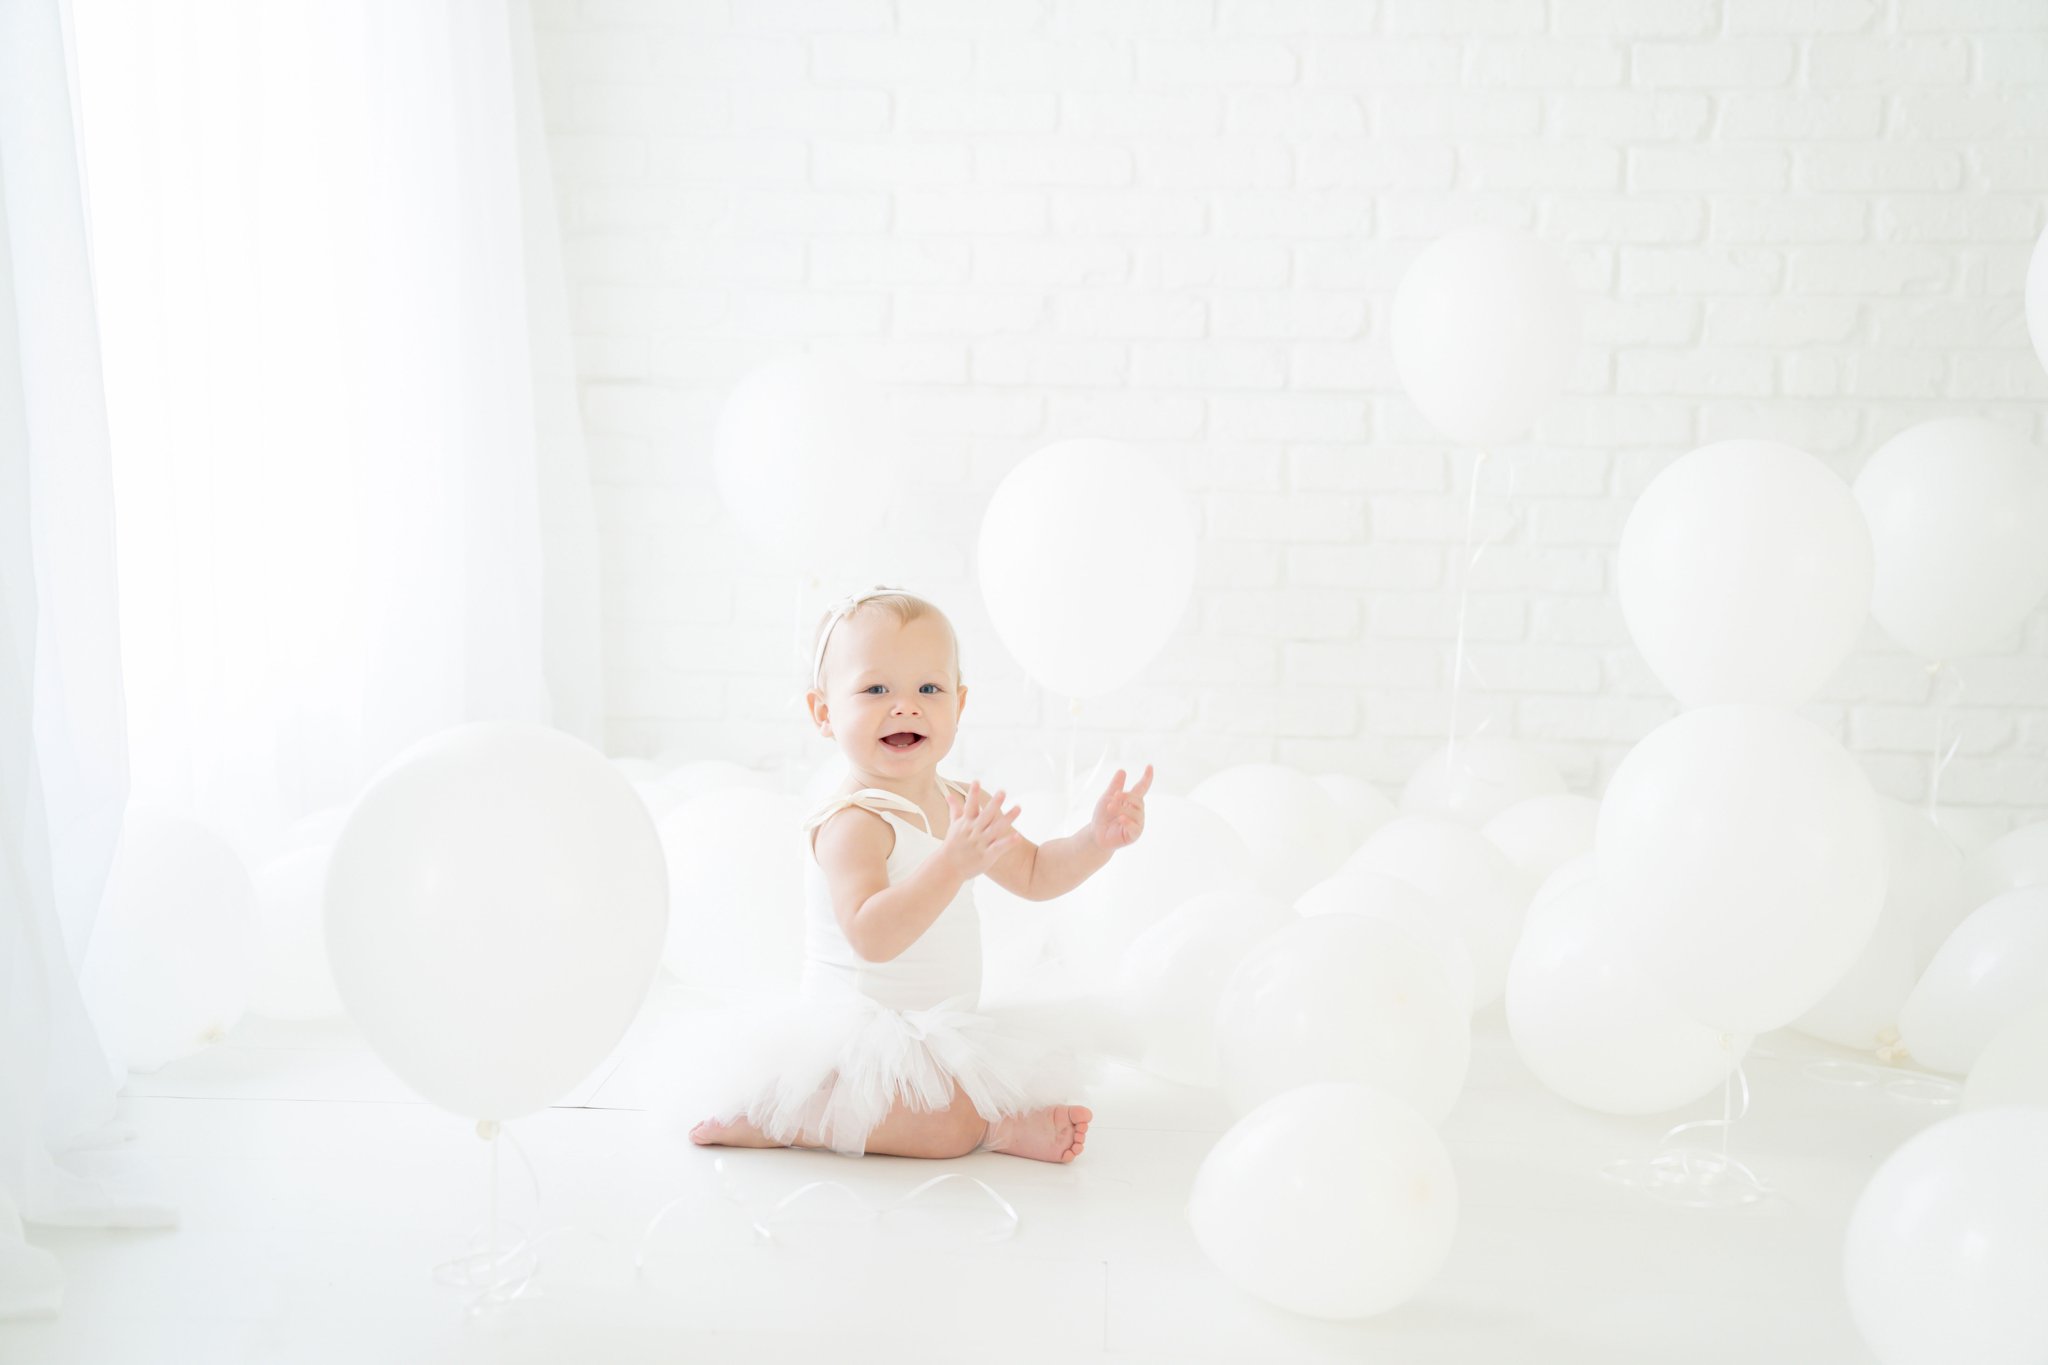 Birthday baby girl being photographed in a south florida photography studio filled with white balloons.